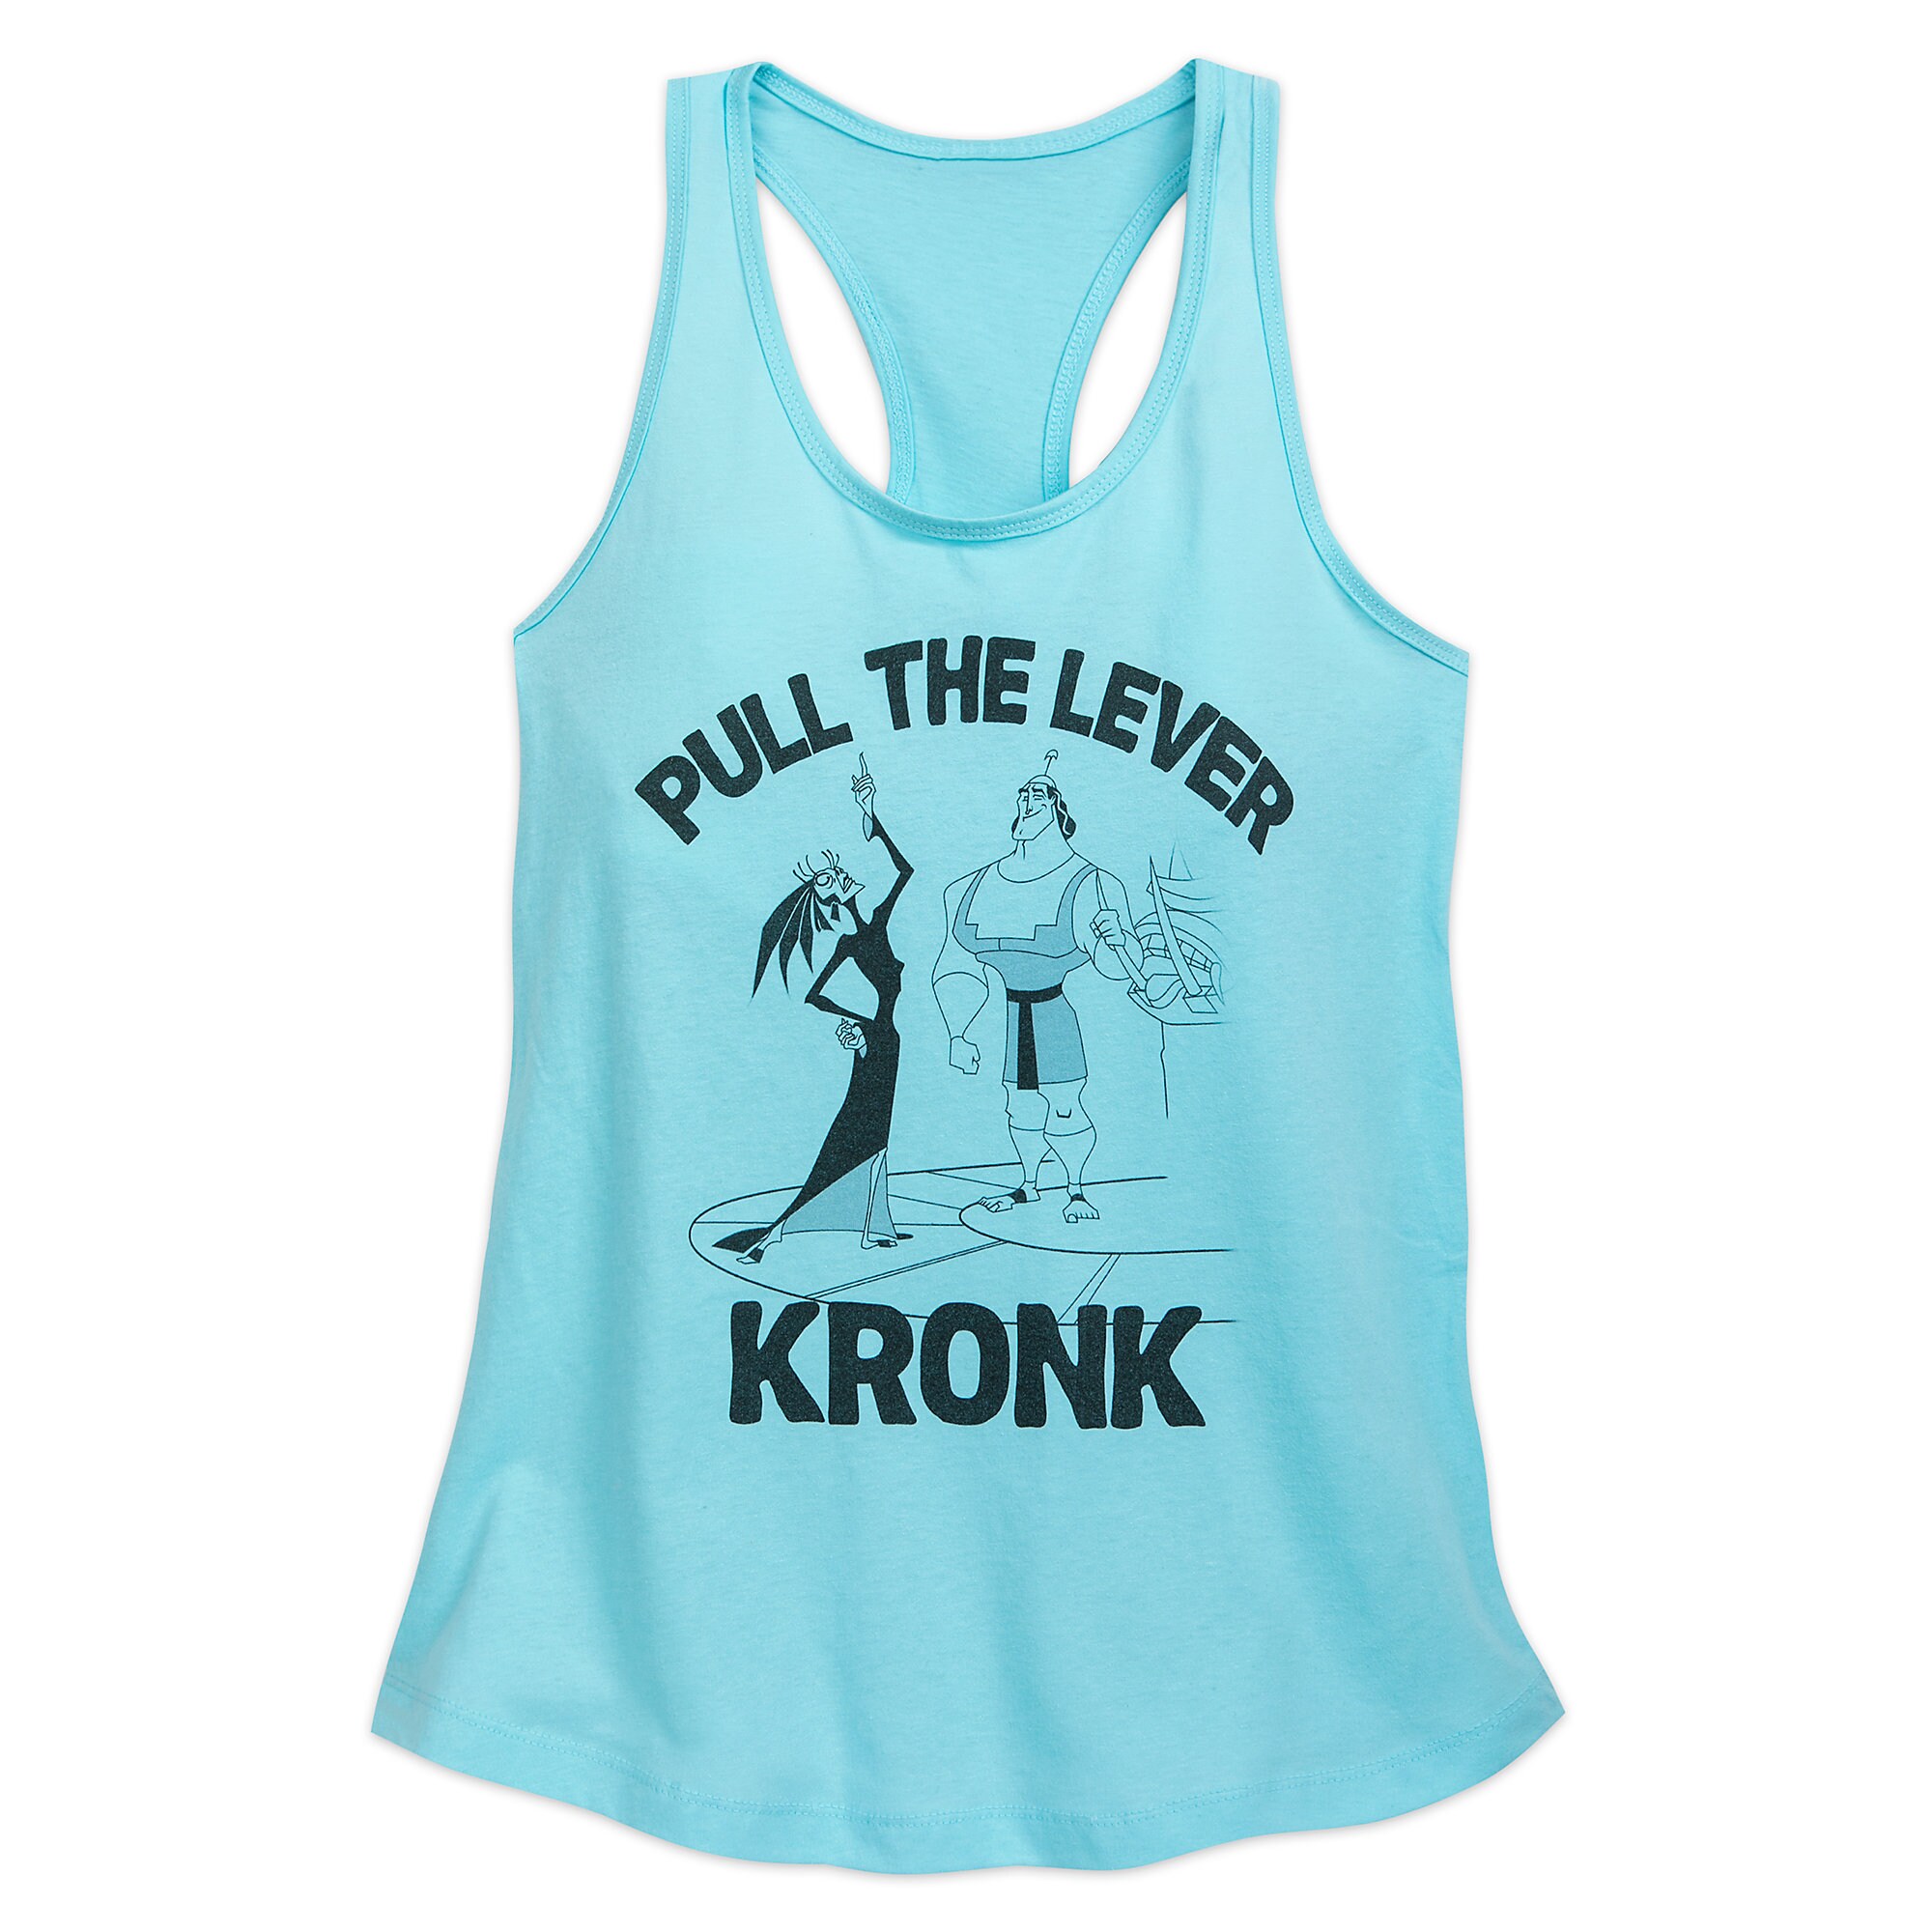 Yzma and Kronk Tank Top for Women